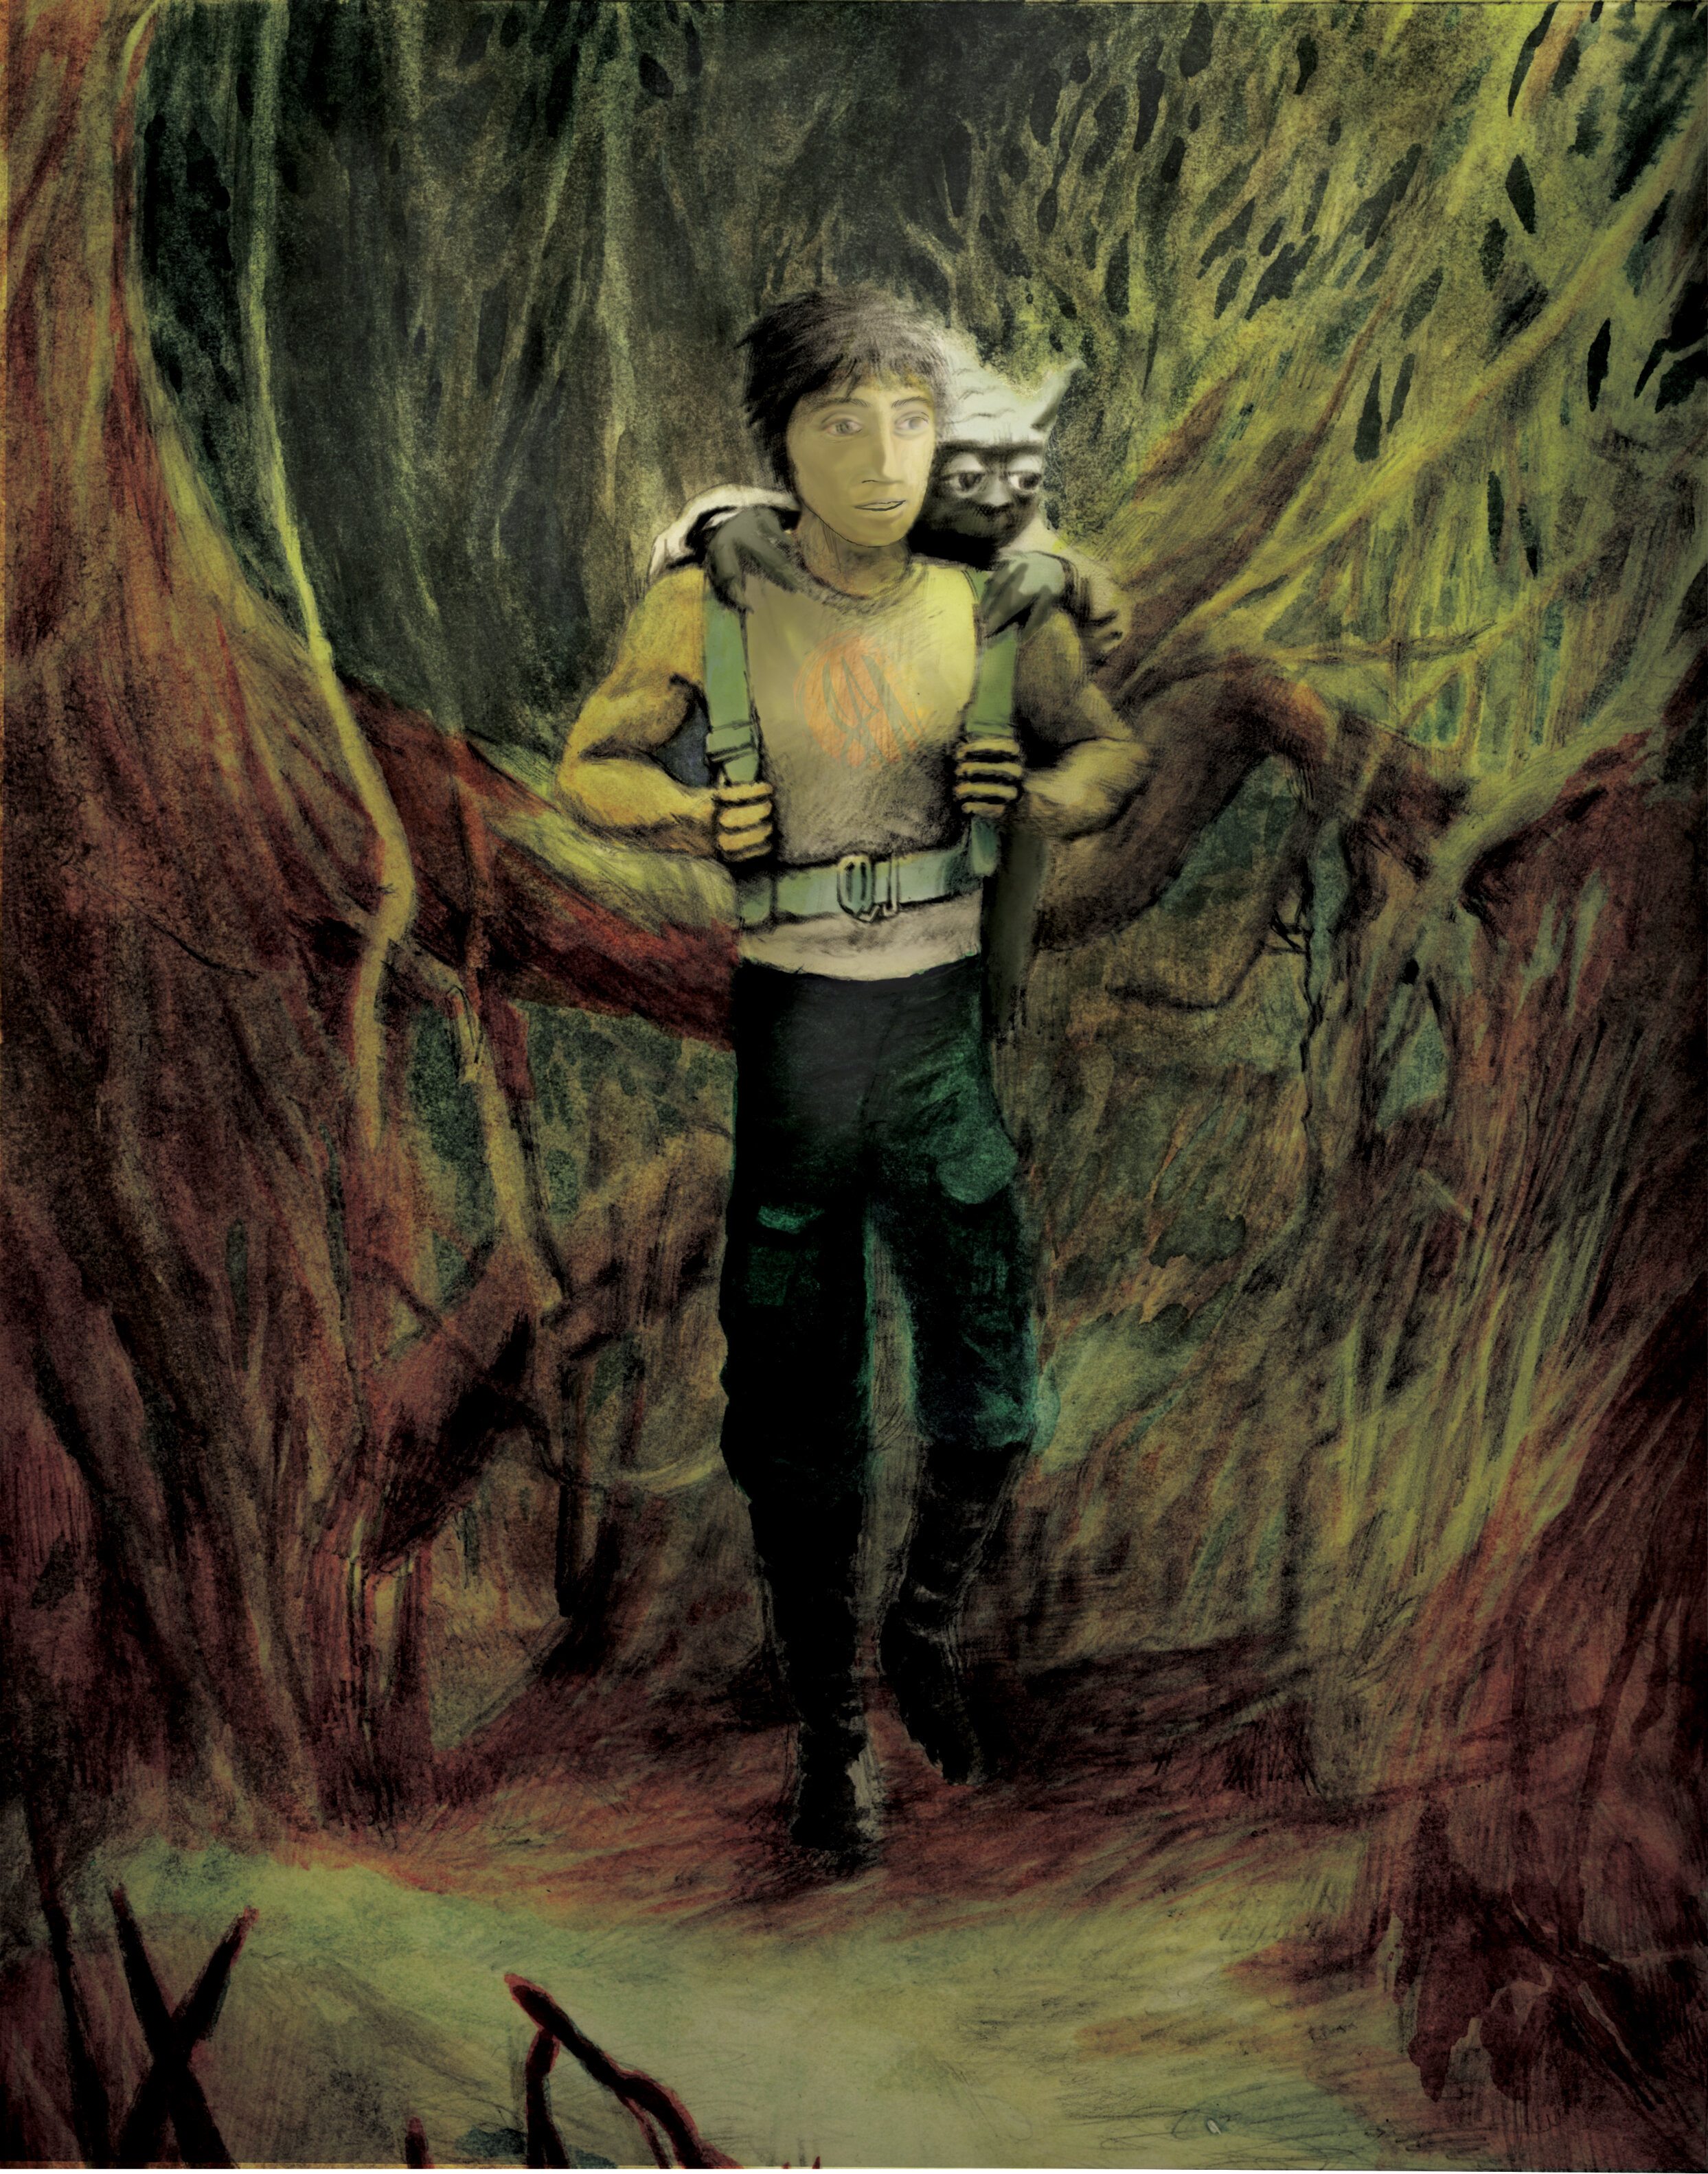 Songs of Experience on Dagobah